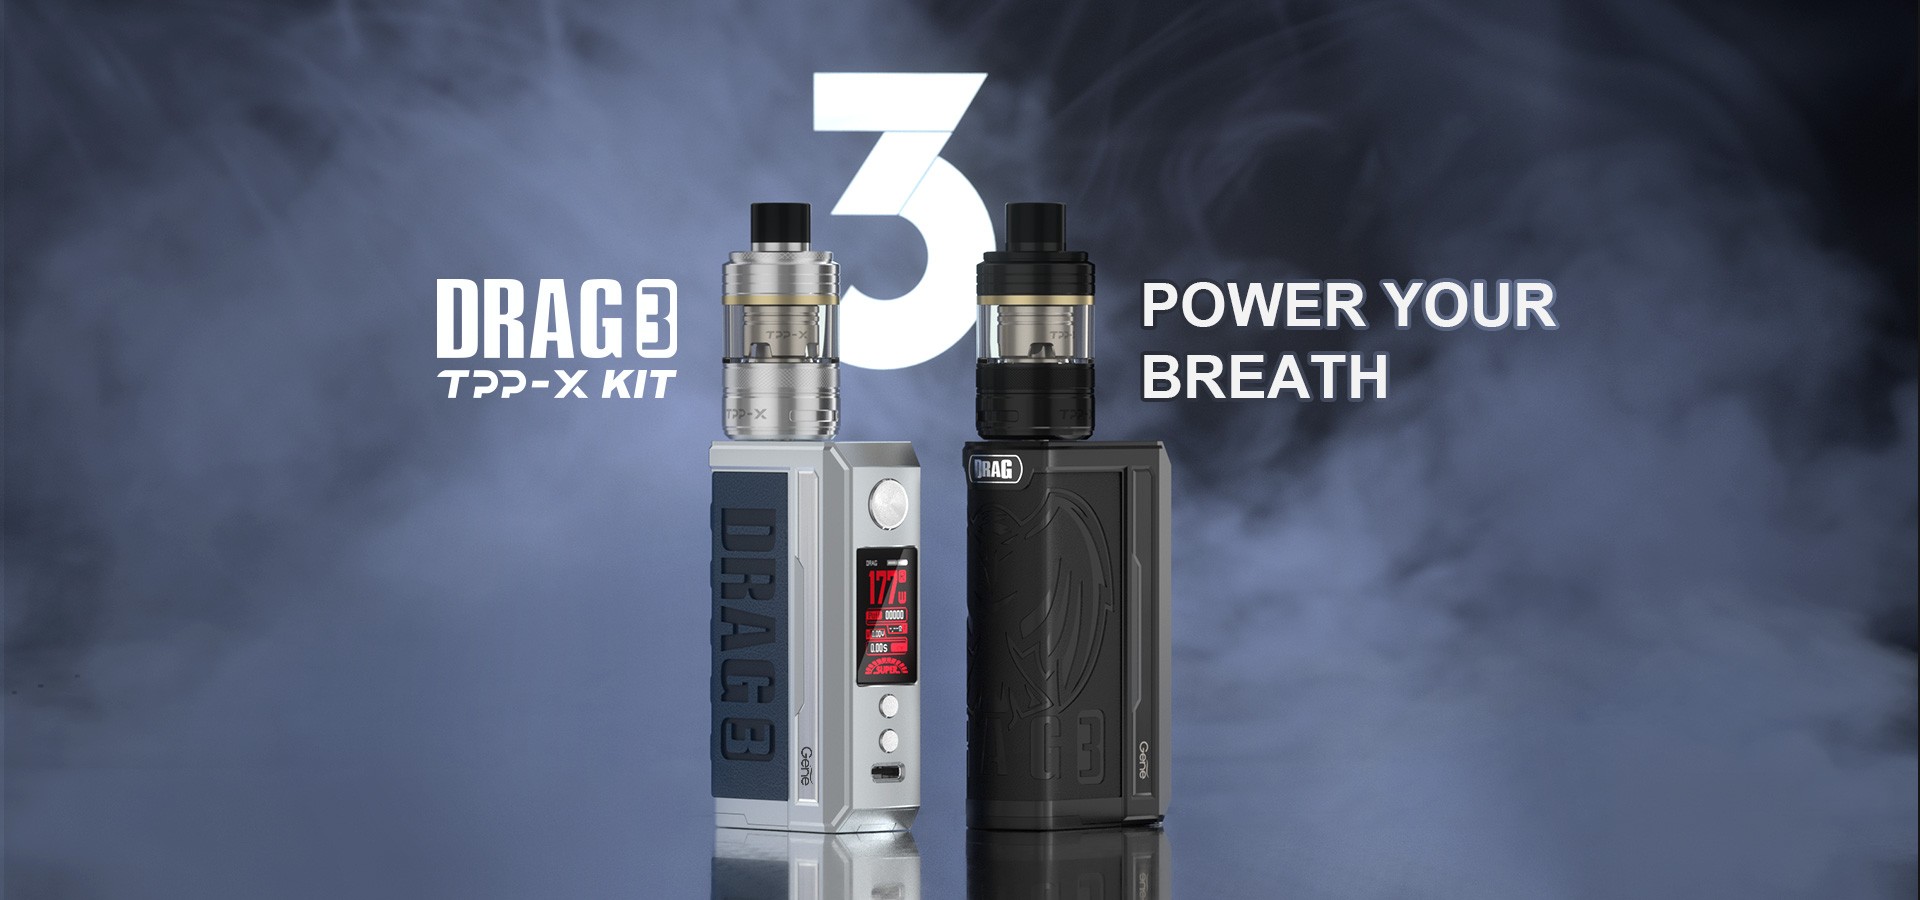 VOOPOO Drag 3 TPP-X Kit Product